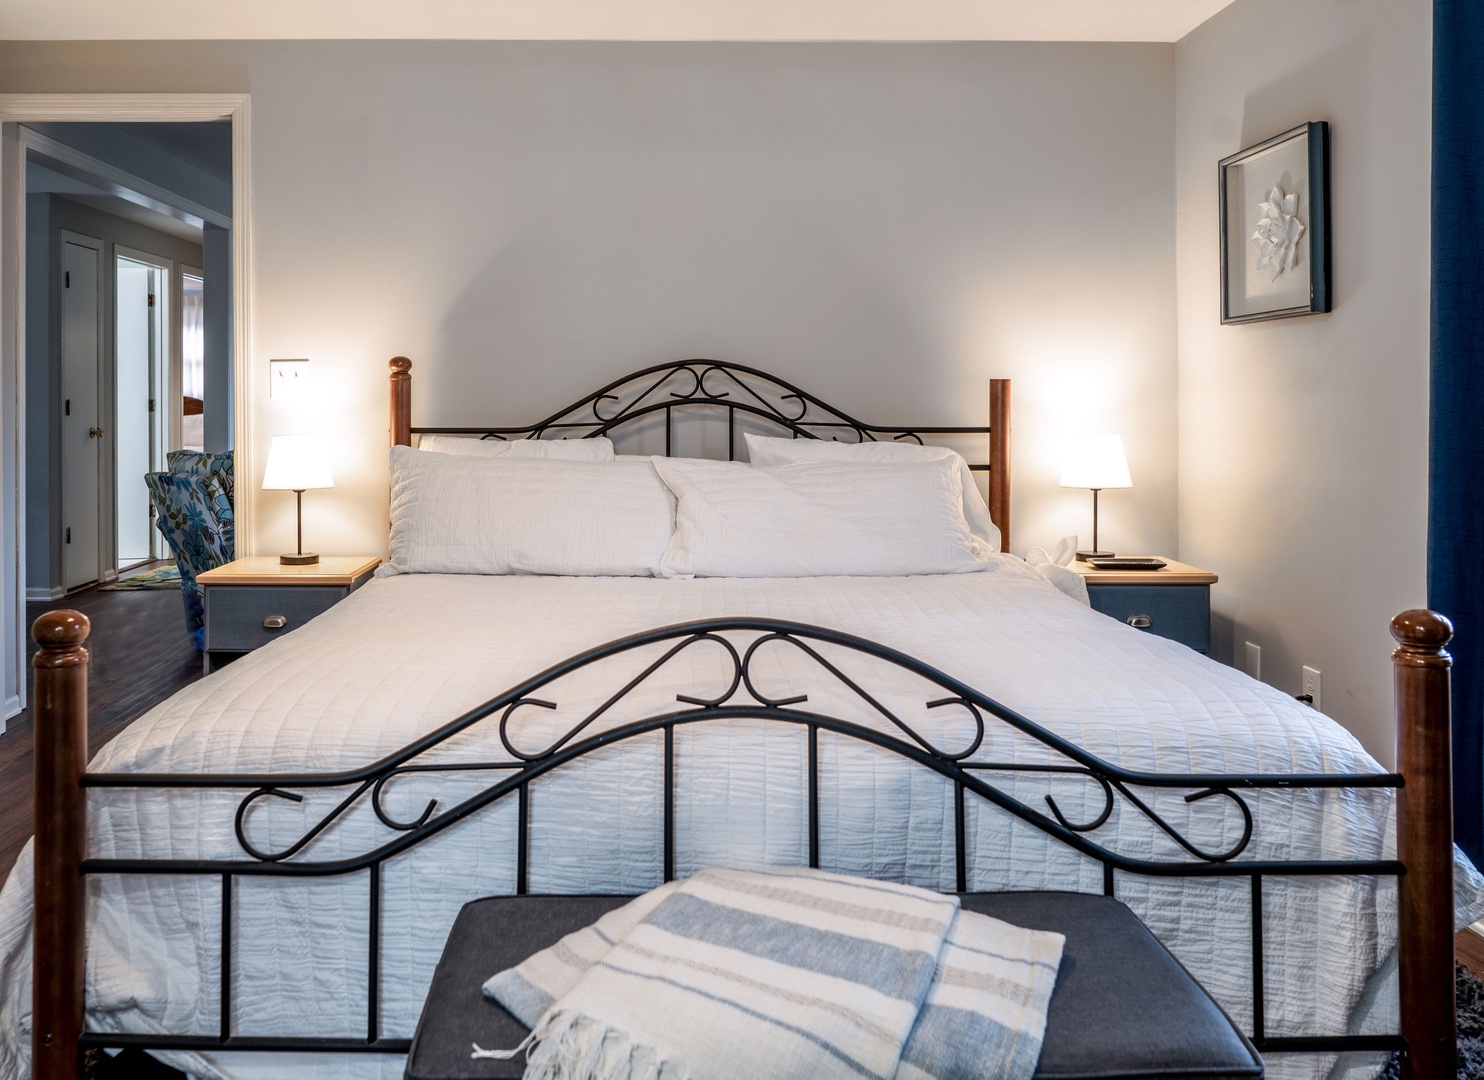 The main-level master bedroom offers a king bed & private ensuite